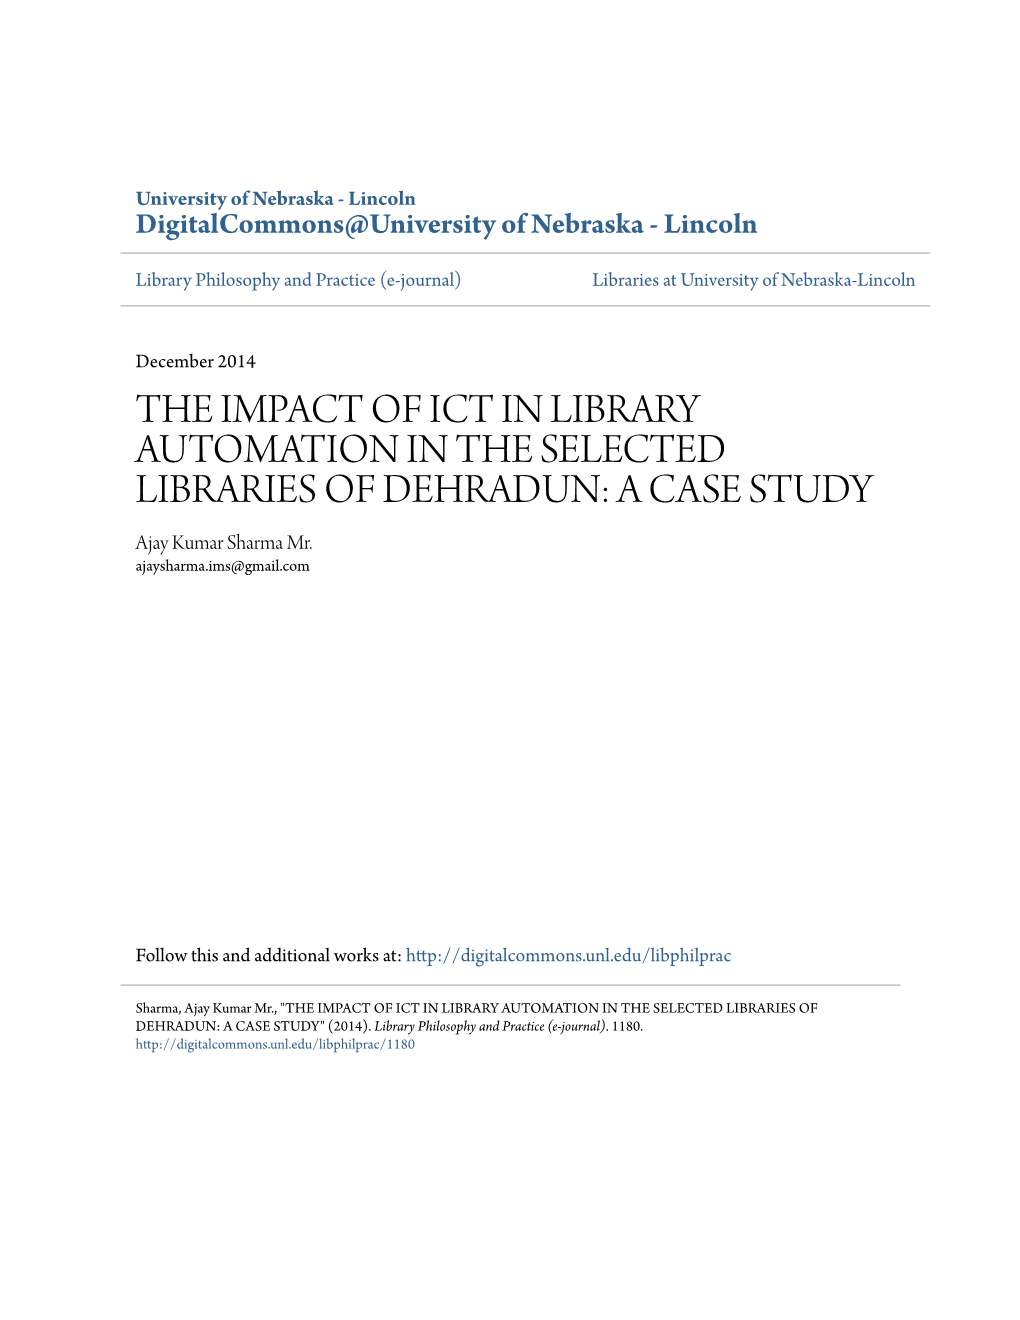 THE IMPACT of ICT in LIBRARY AUTOMATION in the SELECTED LIBRARIES of DEHRADUN: a CASE STUDY Ajay Kumar Sharma Mr